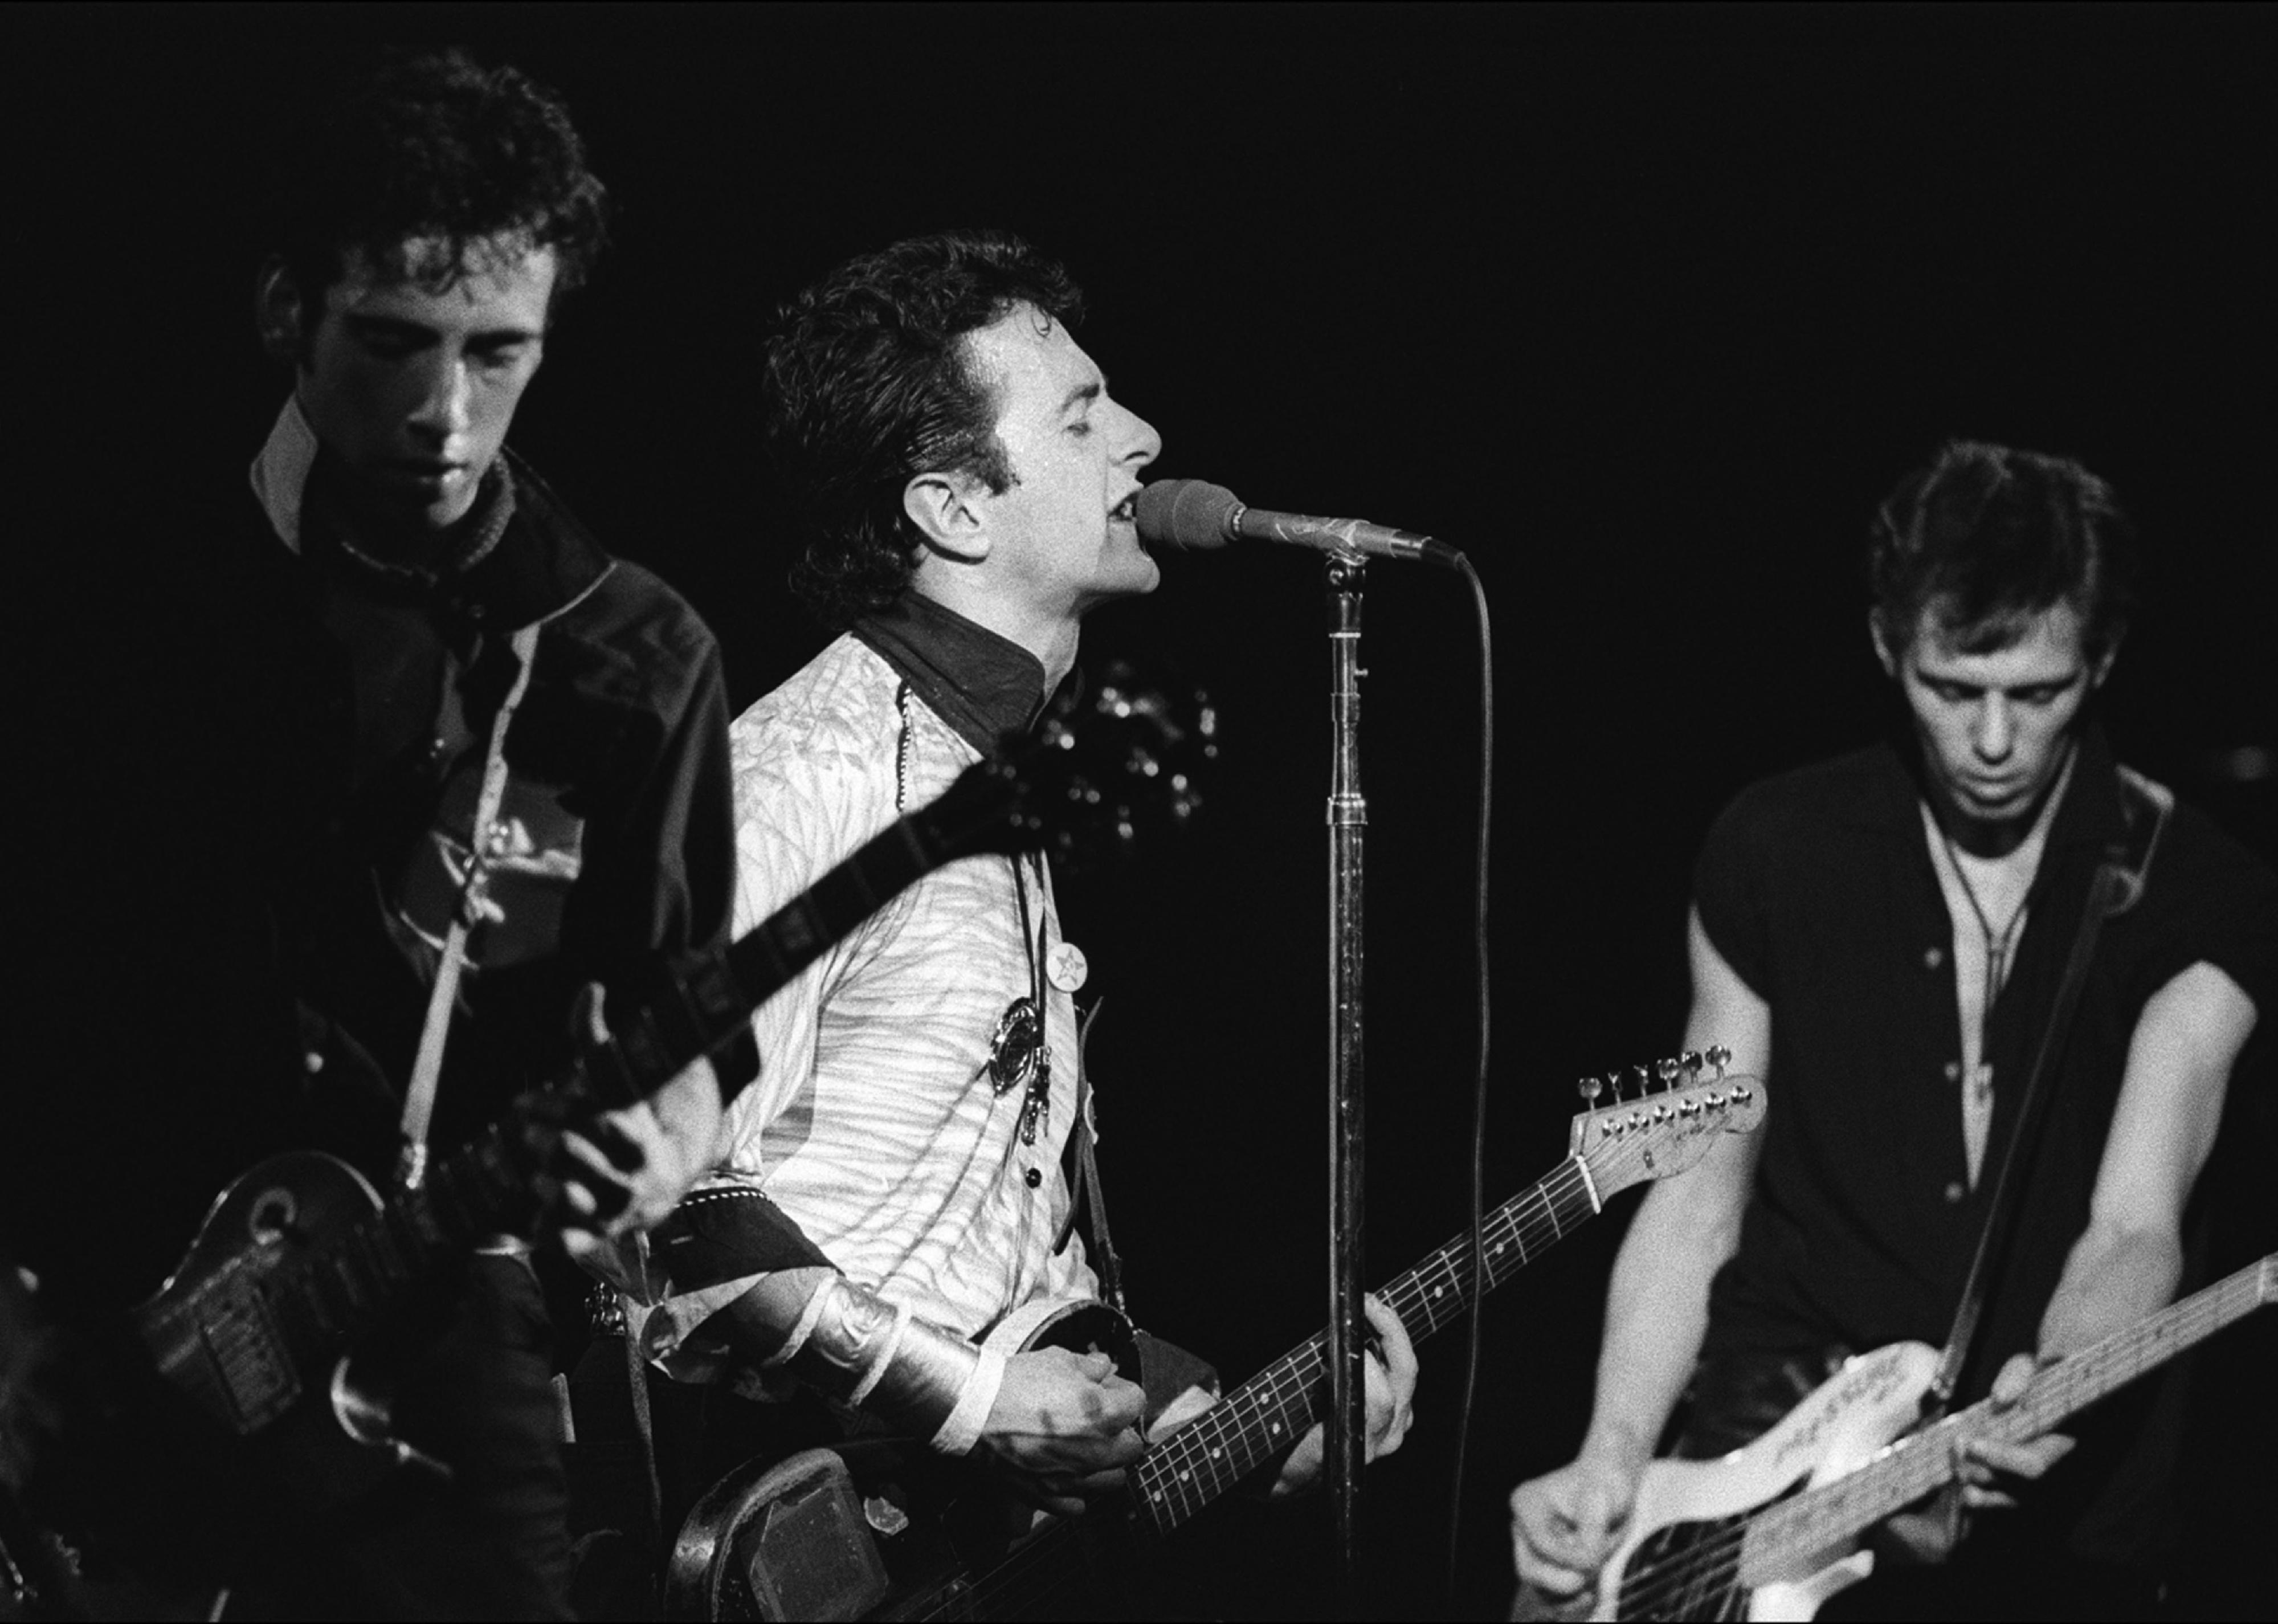 <p>Punk rockers The Clash <a href="https://dangerousminds.net/comments/rarely_seen_film_footage_of_the_clash_at_the_palladium_in_nyc_1979">played New York City for the first time</a> with a legendary two-night stint at The Palladium. A photograph of Paul Simonon destroying his Fender P-Bass guitar during the show would make up the cover for their next album, "London Calling." To this day, it's considered one of the most iconic album covers of all time.</p> <p><strong>You may also like:</strong> <a href="https://stacker.com/music/25-hip-hop-pioneers-then-and-now">25 hip-hop pioneers: Then and now</a></p>